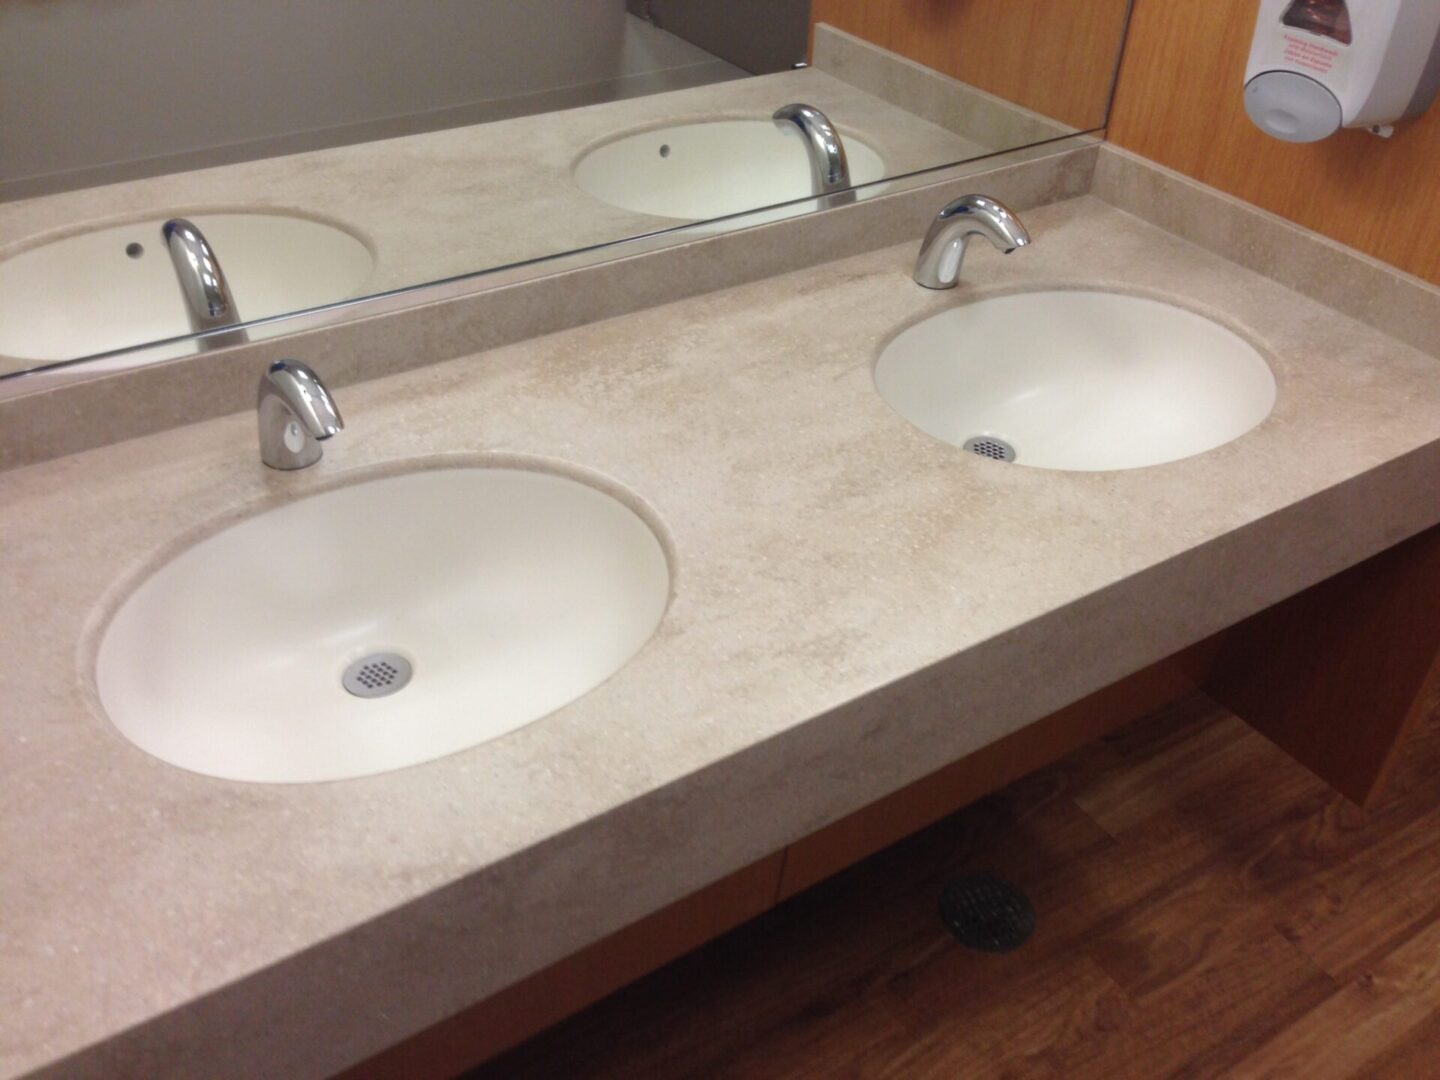 Close view of the two wash basins and mirror